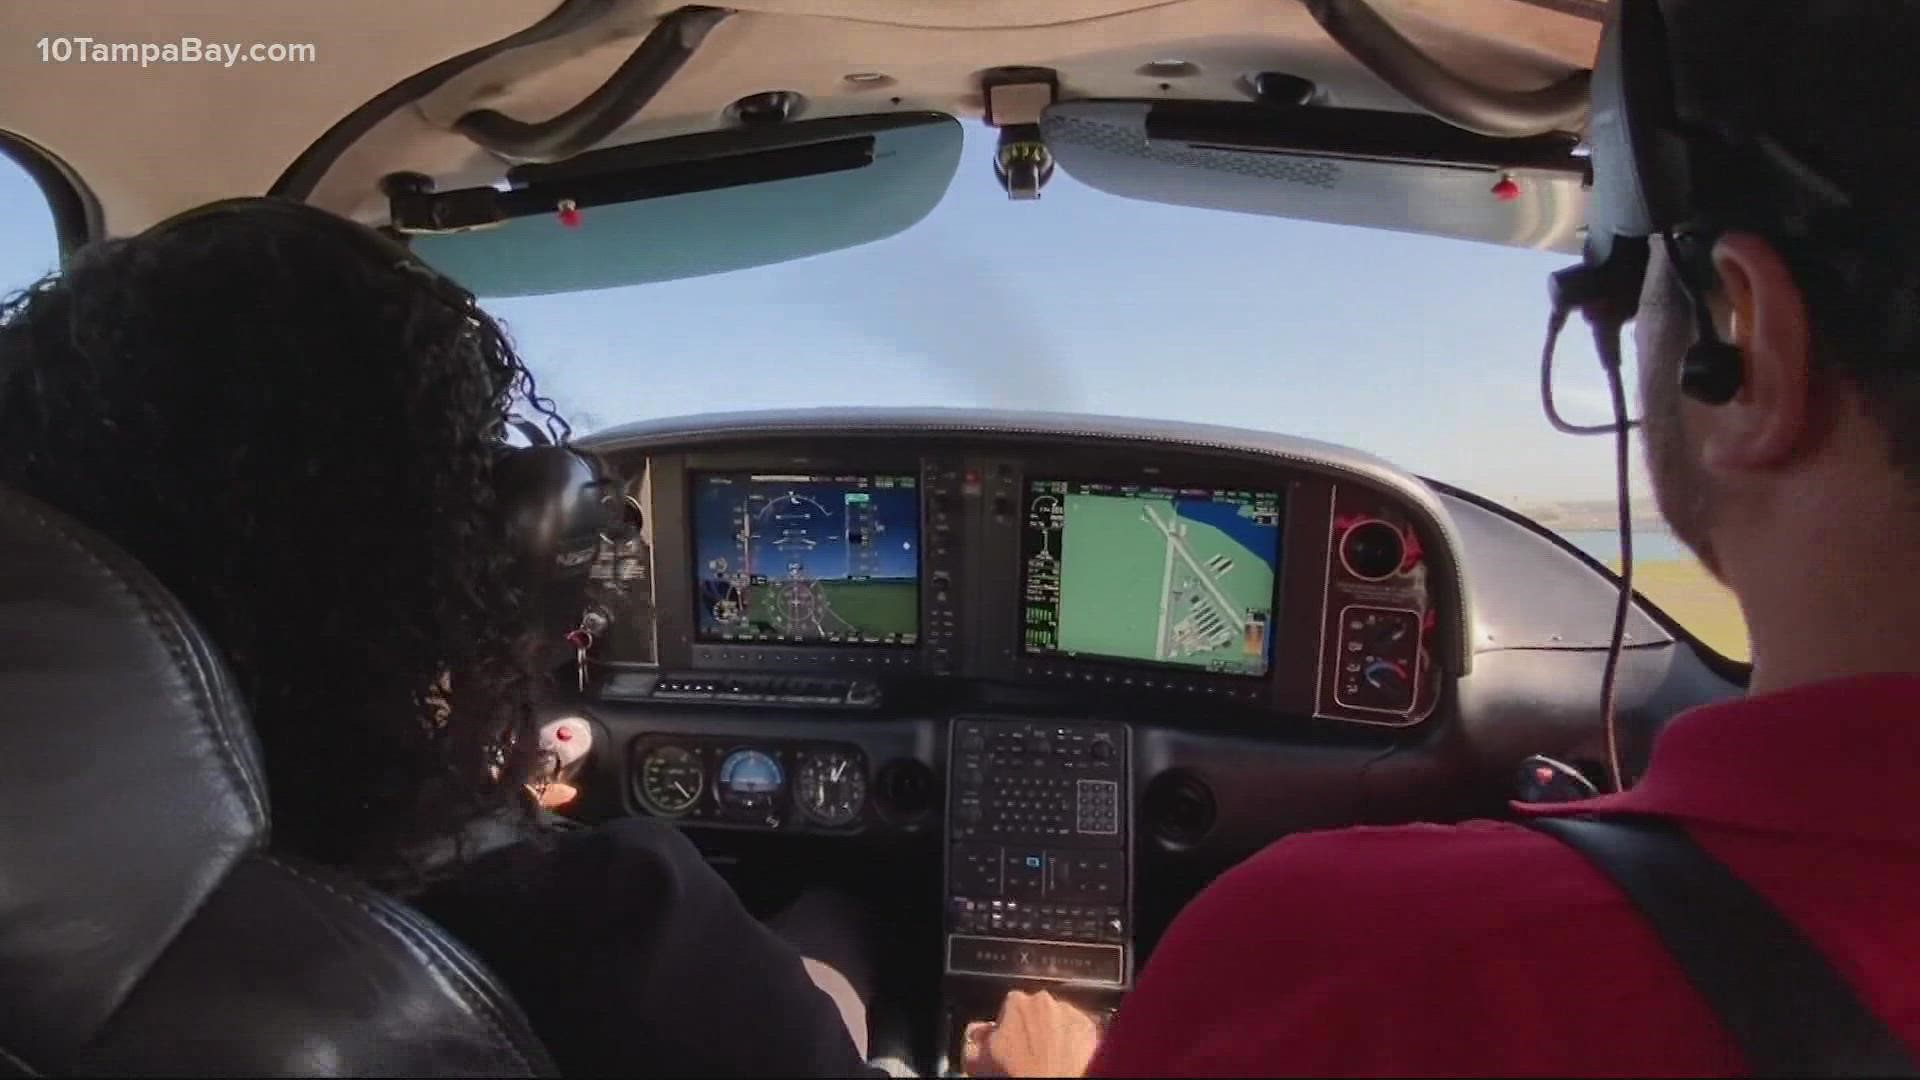 The word's first all-woman air show was held in Tampa at Peter O. Knight Airport.